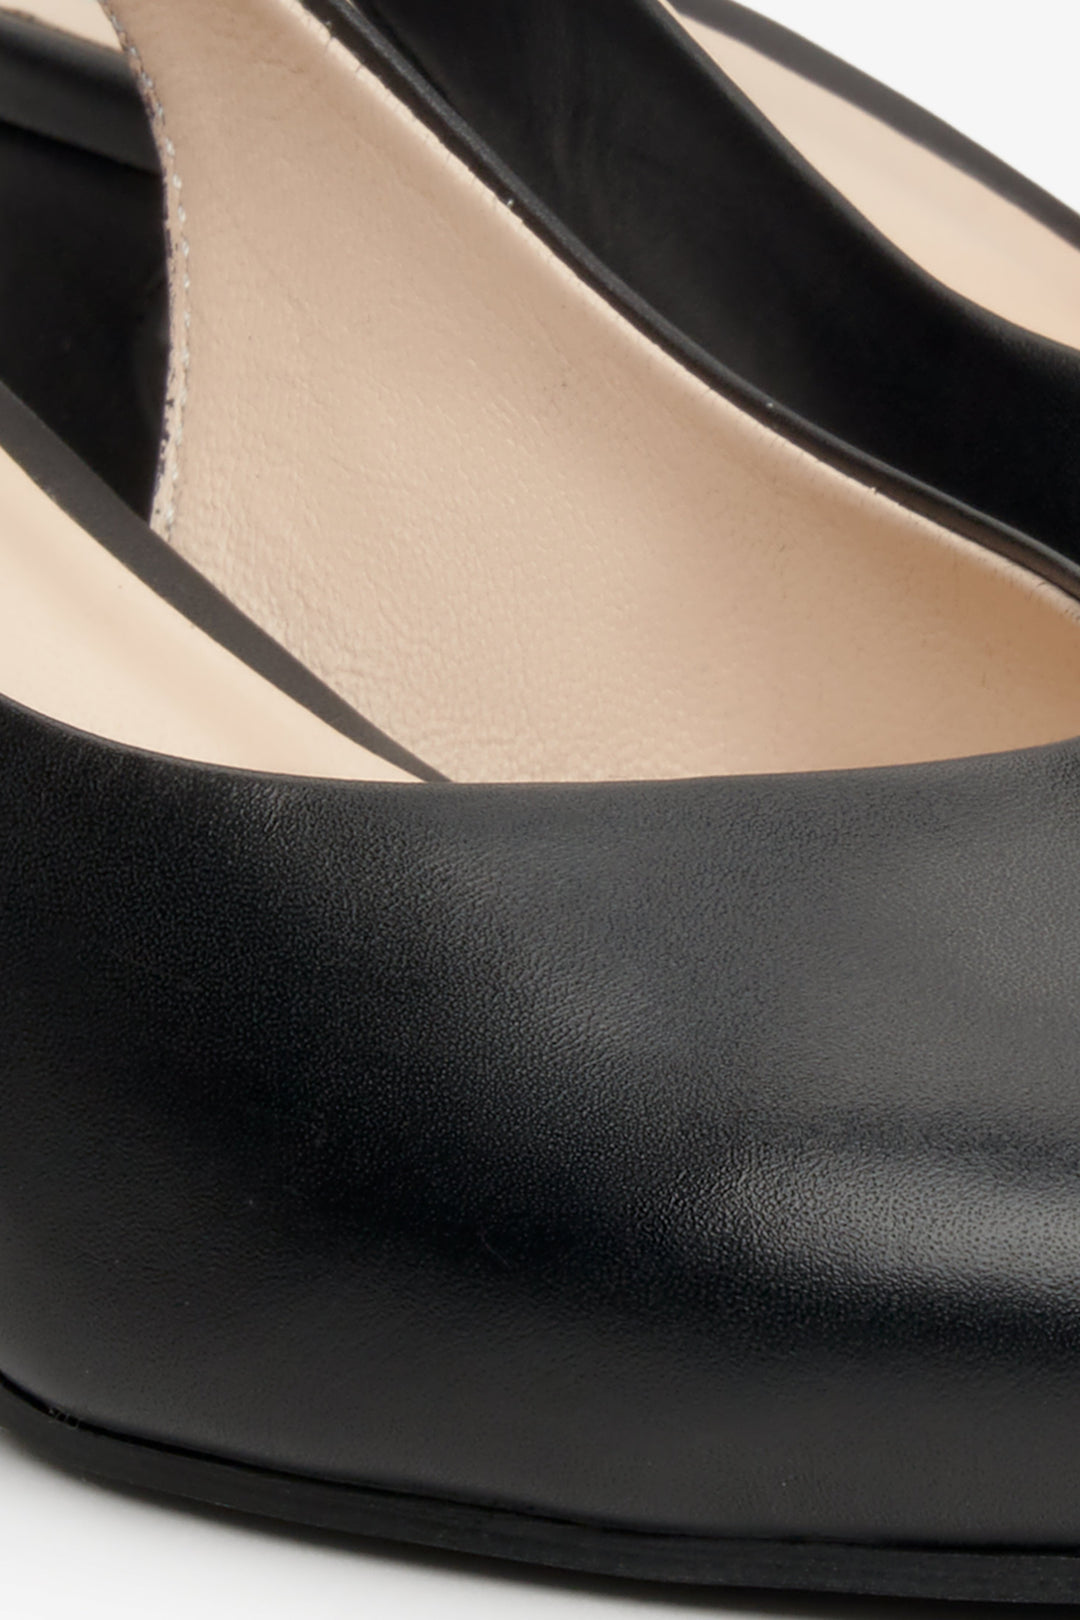 Women's black leather open-back pumps by Estro - close-up on the details.